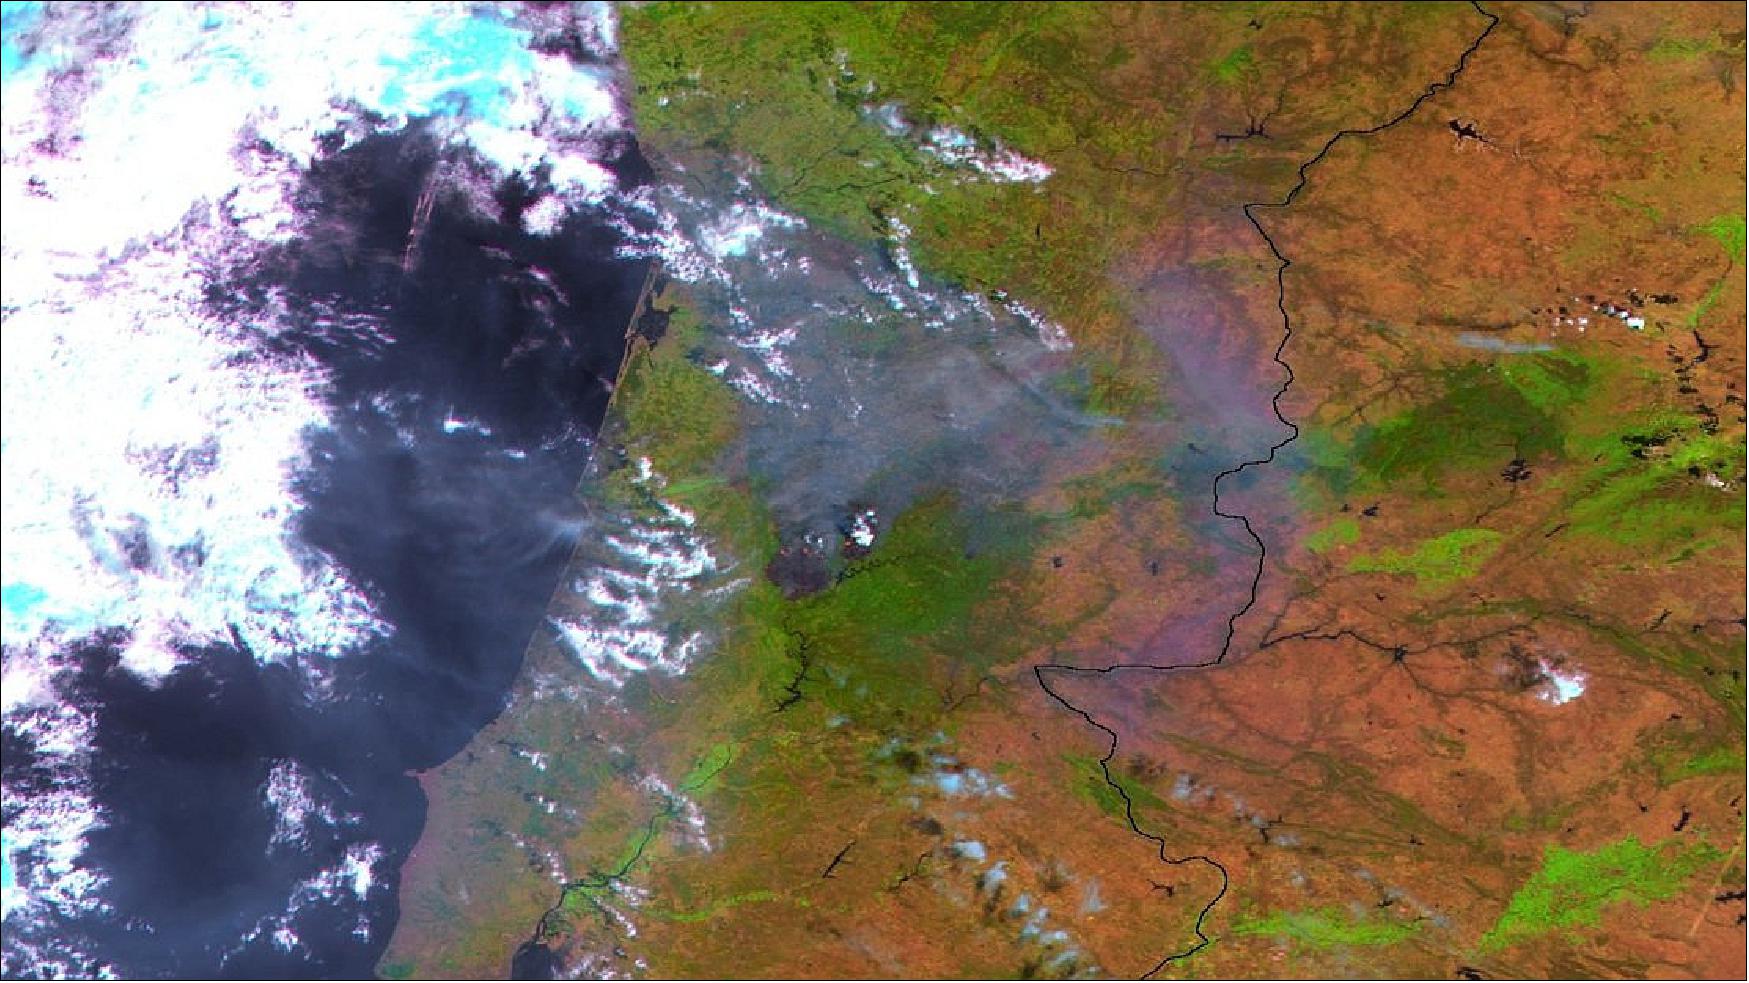 Figure 38: Regional view of fire: A forest fire in Portugal's Pedrógão Grande region, showing burnt scars, smoke plumes and hotspots (seen in red). This 330 m-resolution image was acquired on 18 June 2017 by ESA's PROBA-V satellite (image credit: ESA/BELSPO produced by VITO)